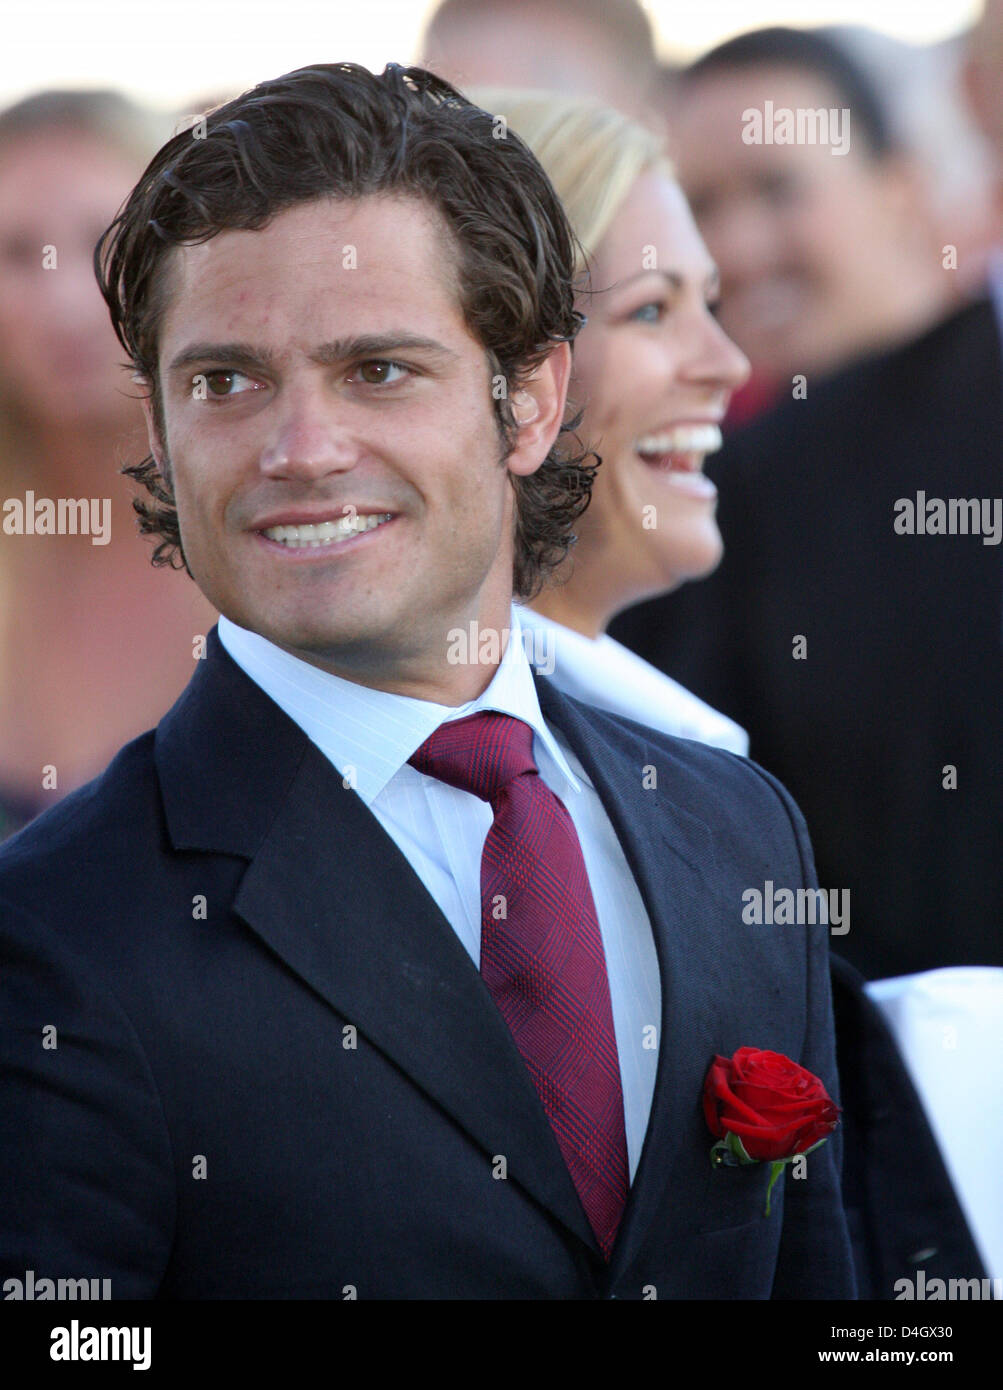 Prince Carl Philip of Sweden is pictured while celebrating the 31th birthday of his sister Crown Princess Victoria at the sports arena in Borgholm, Sweden, 14 July 2008. Photo: Albert Nieboer (Attention: NETHERLANDS OUT!) Stock Photo